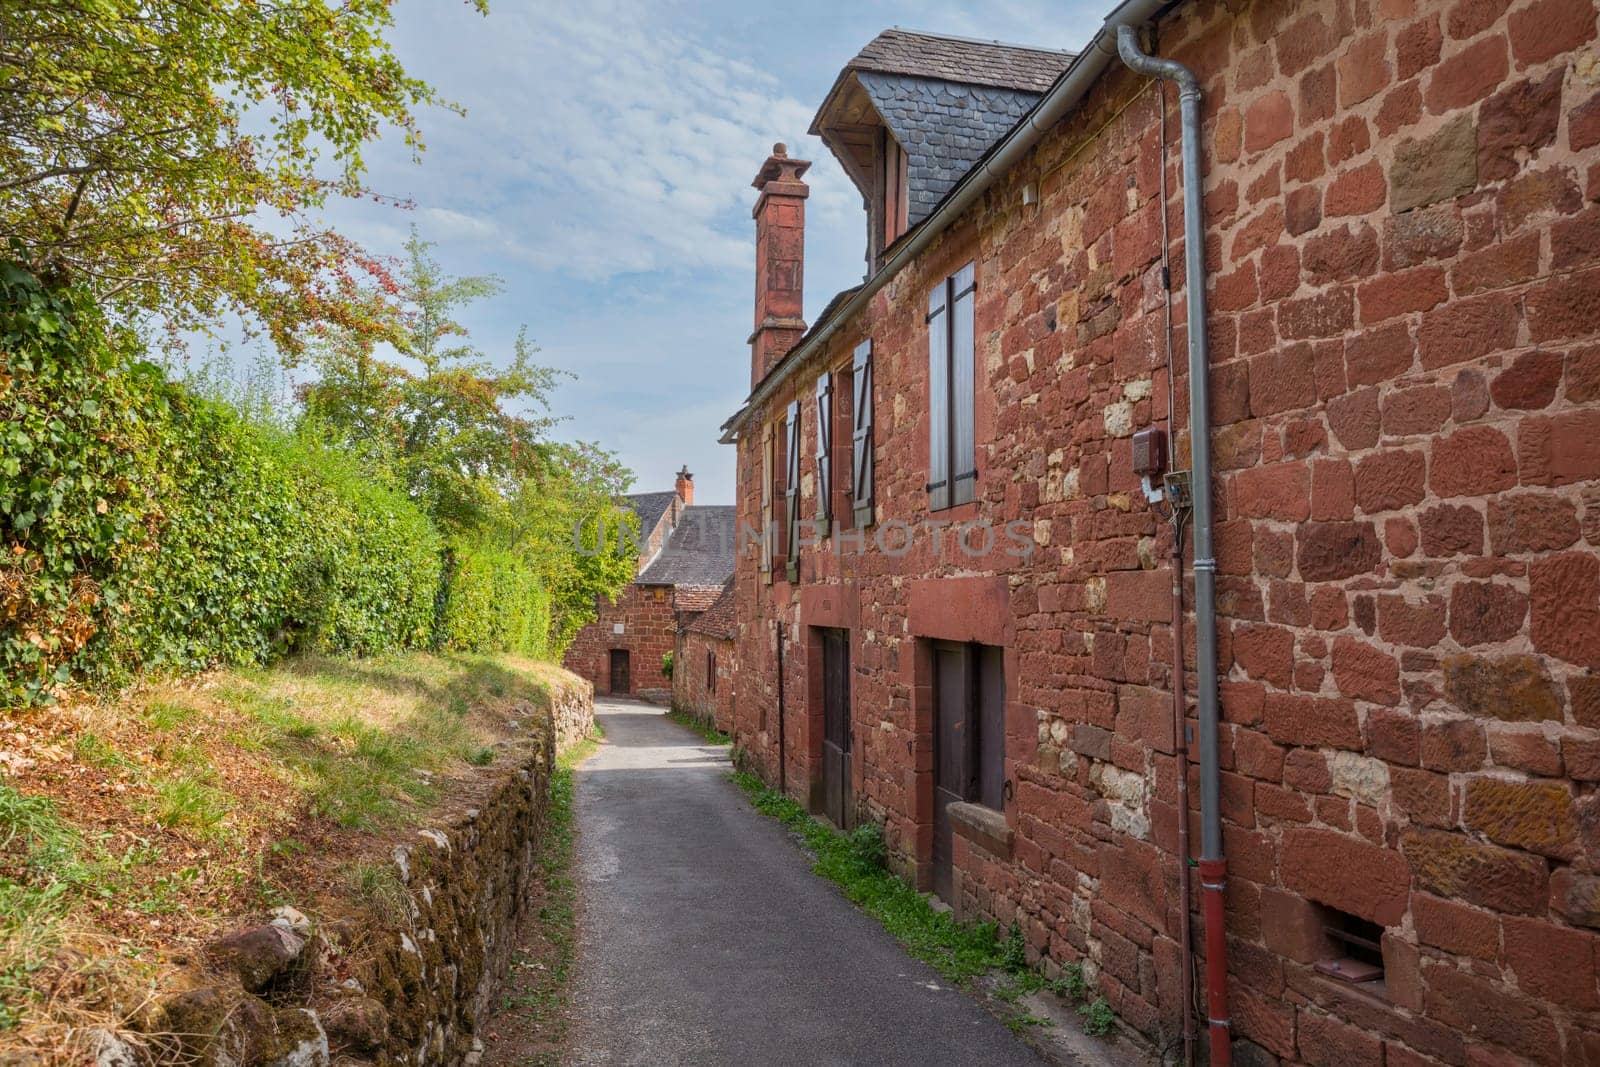 Collonges la Rouge, distinctive red brick houses and towers of the medieval Old Town, France. it is the first member of the Plus Beaux Villages de France nomination most beautiful villages of France by compuinfoto